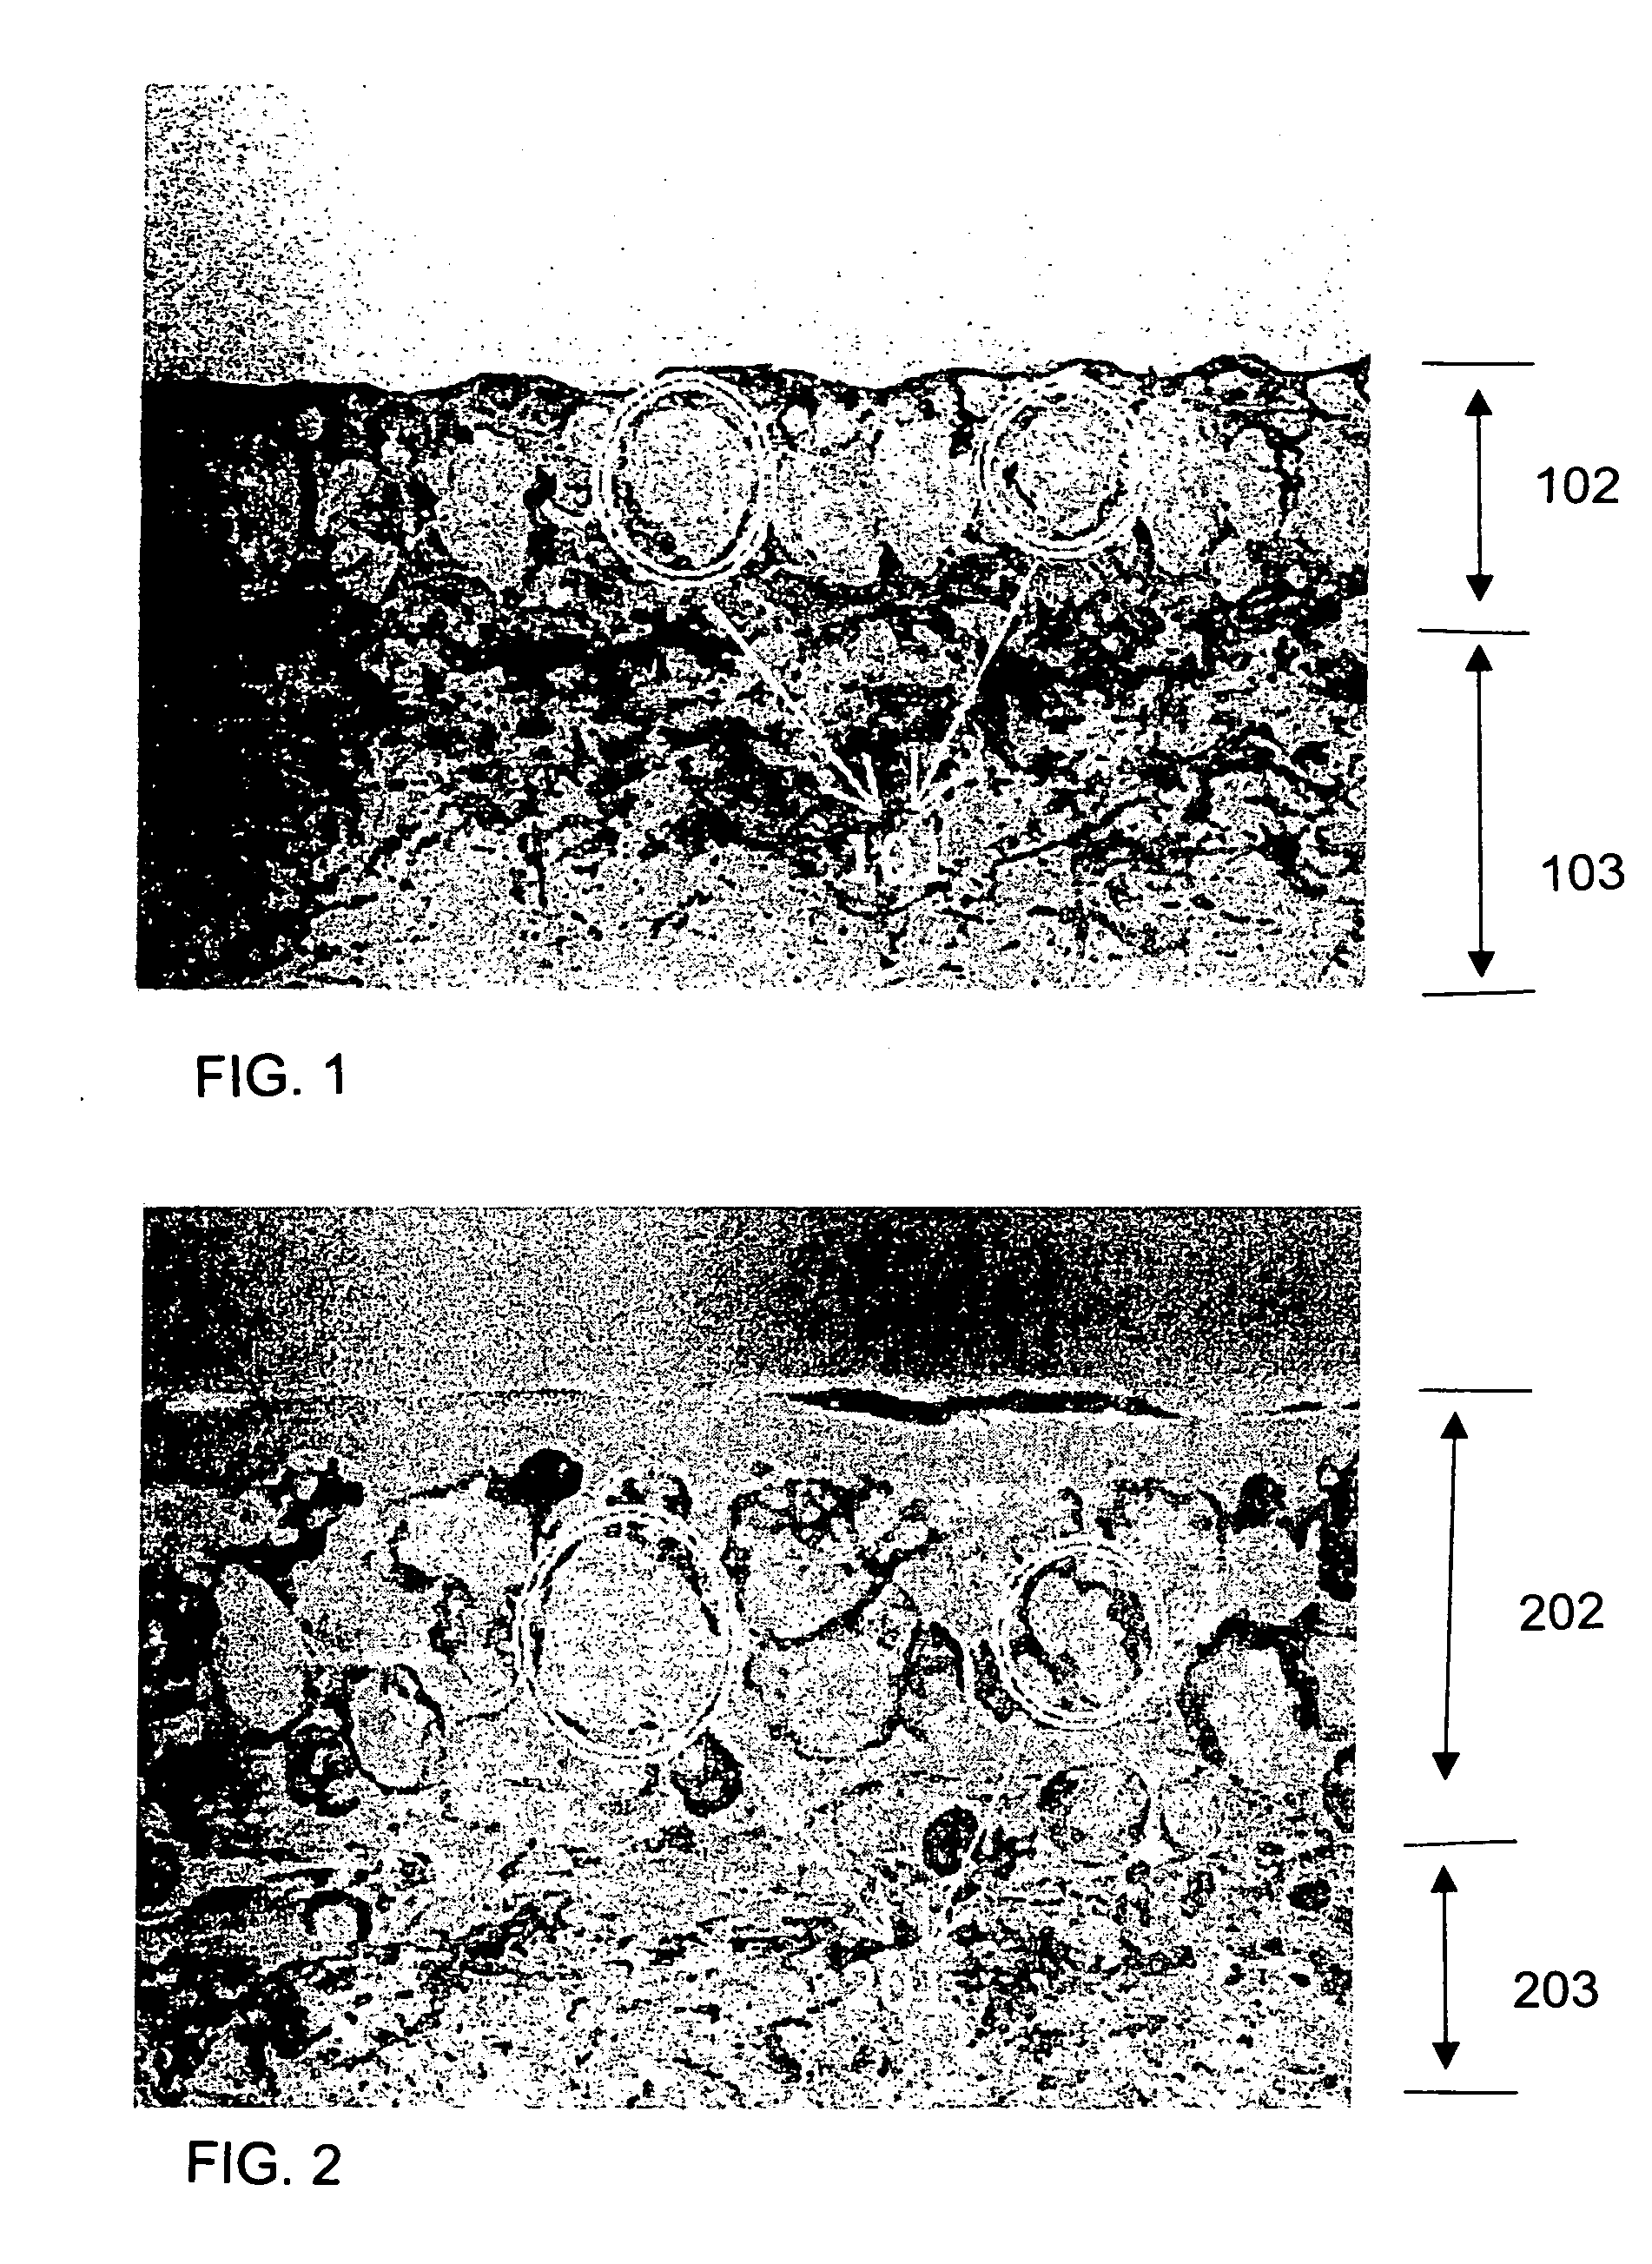 Solvent-less polyurethane foam with micro pores and method of fabricating synthetic leather therefrom